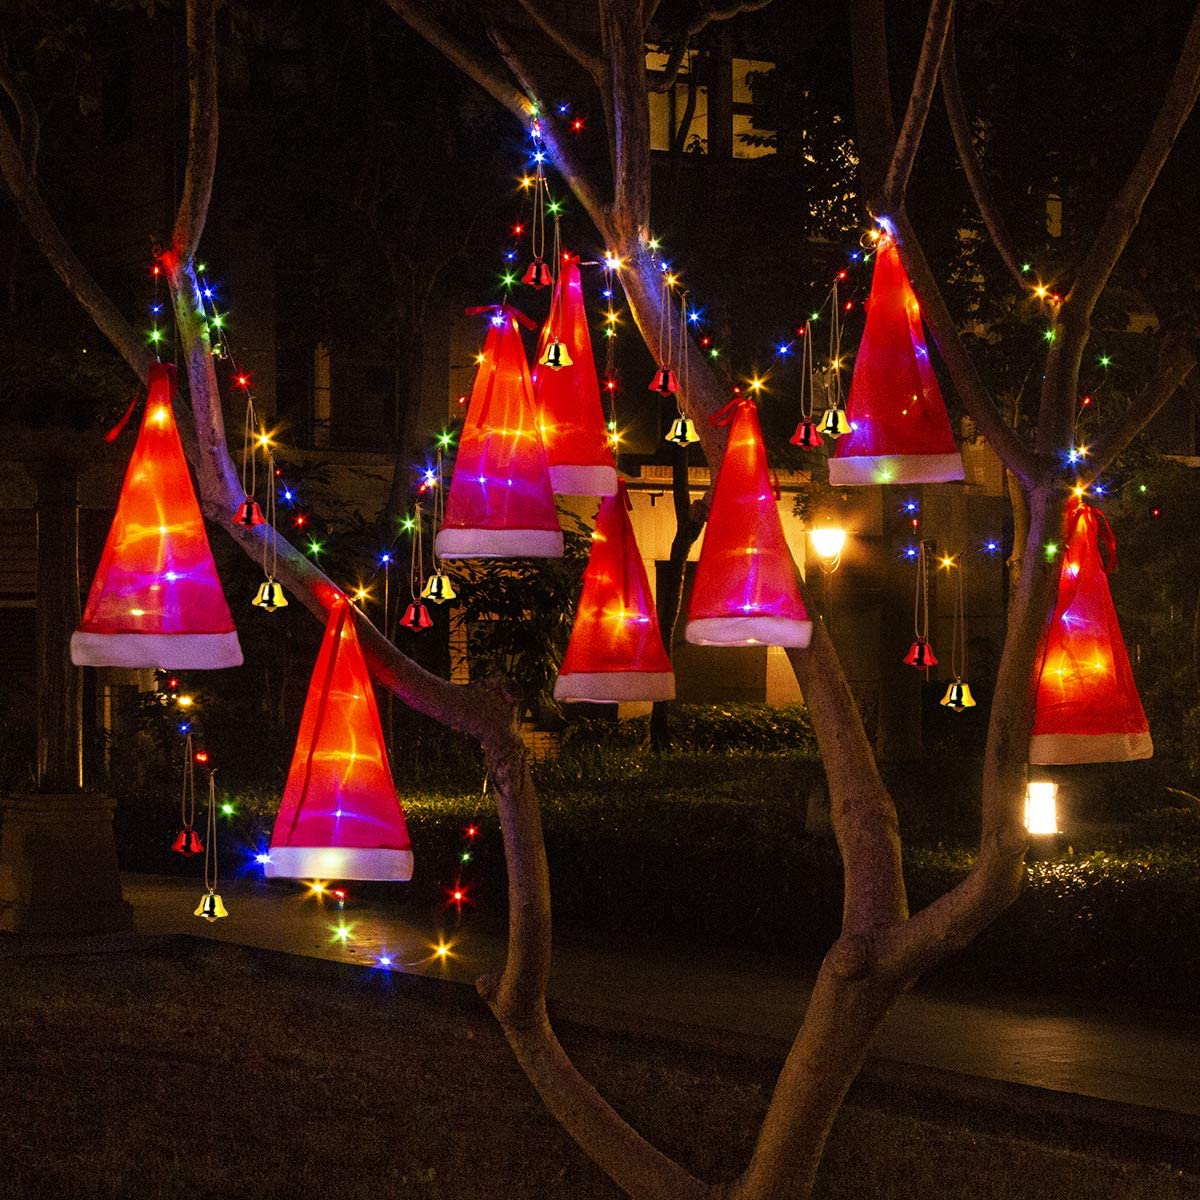 8Pcs Hangings Lighted Glowing Santa Hats with 14Pcs Small Decor Bells 33ft Christmas Lights String with 8 Lighting Modes for Outdoor,Indoor,Yard,Christmas Xmas Tree Decorative Ornaments - image 1 of 6